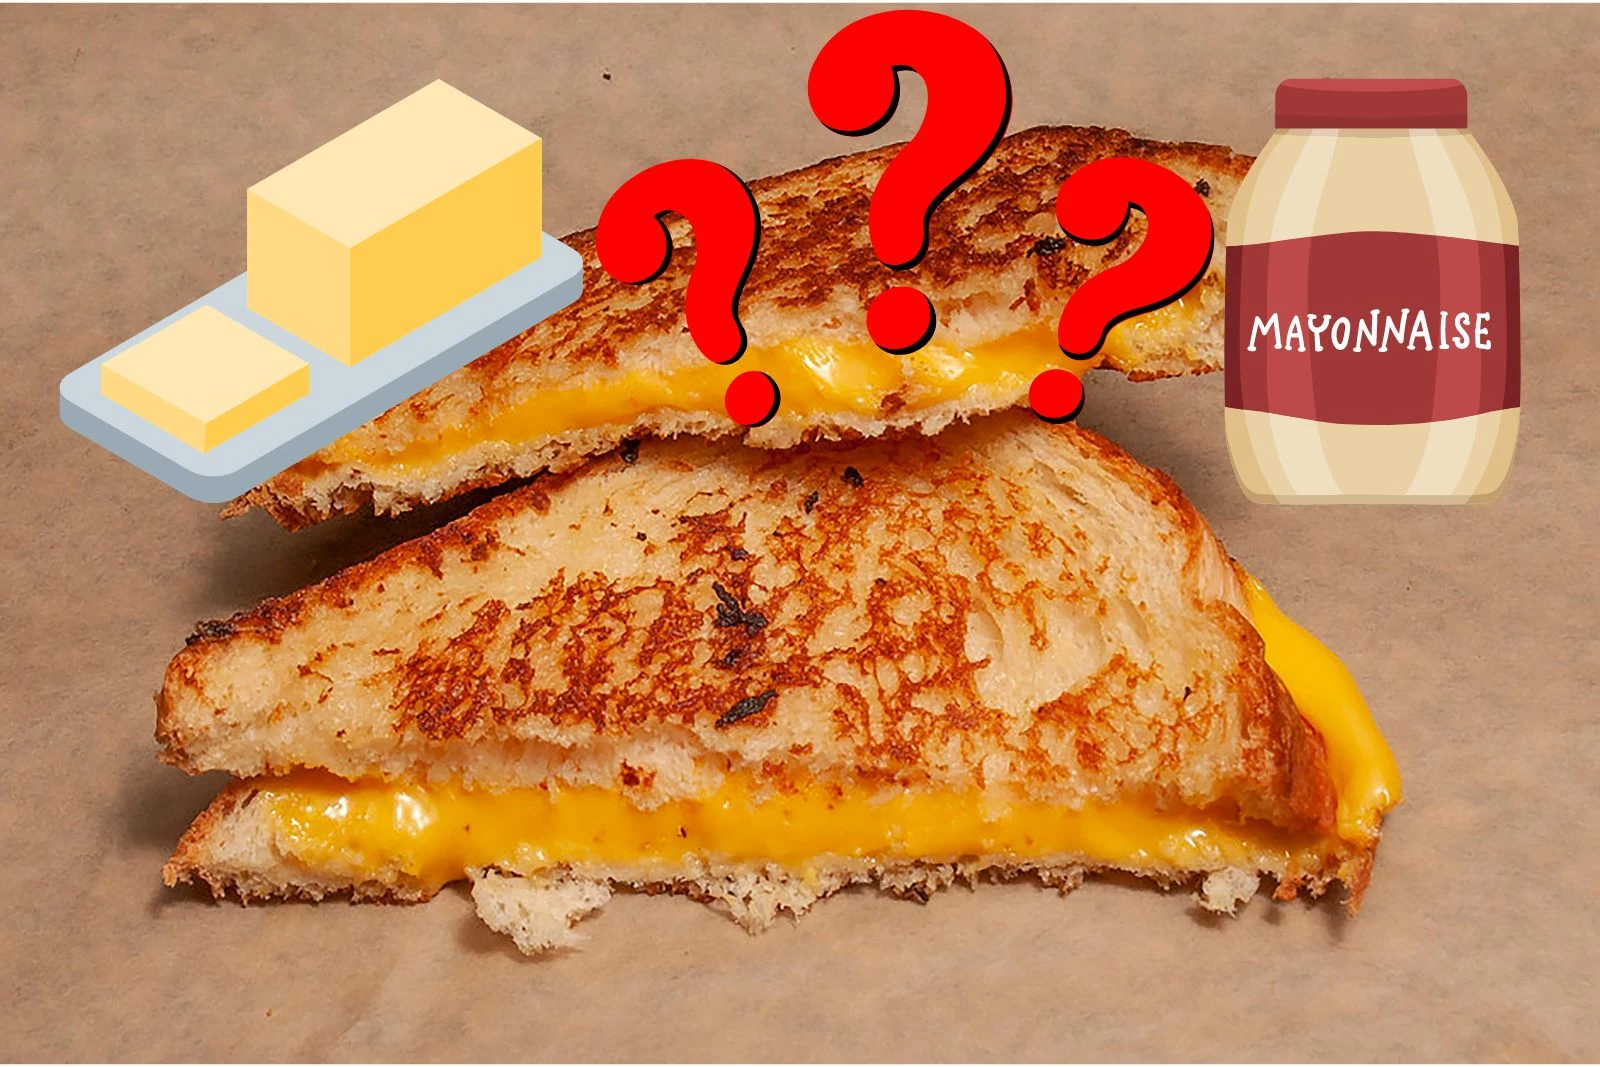 Butter Or Mayonnaise? How Do You Make A Grilled Cheese?